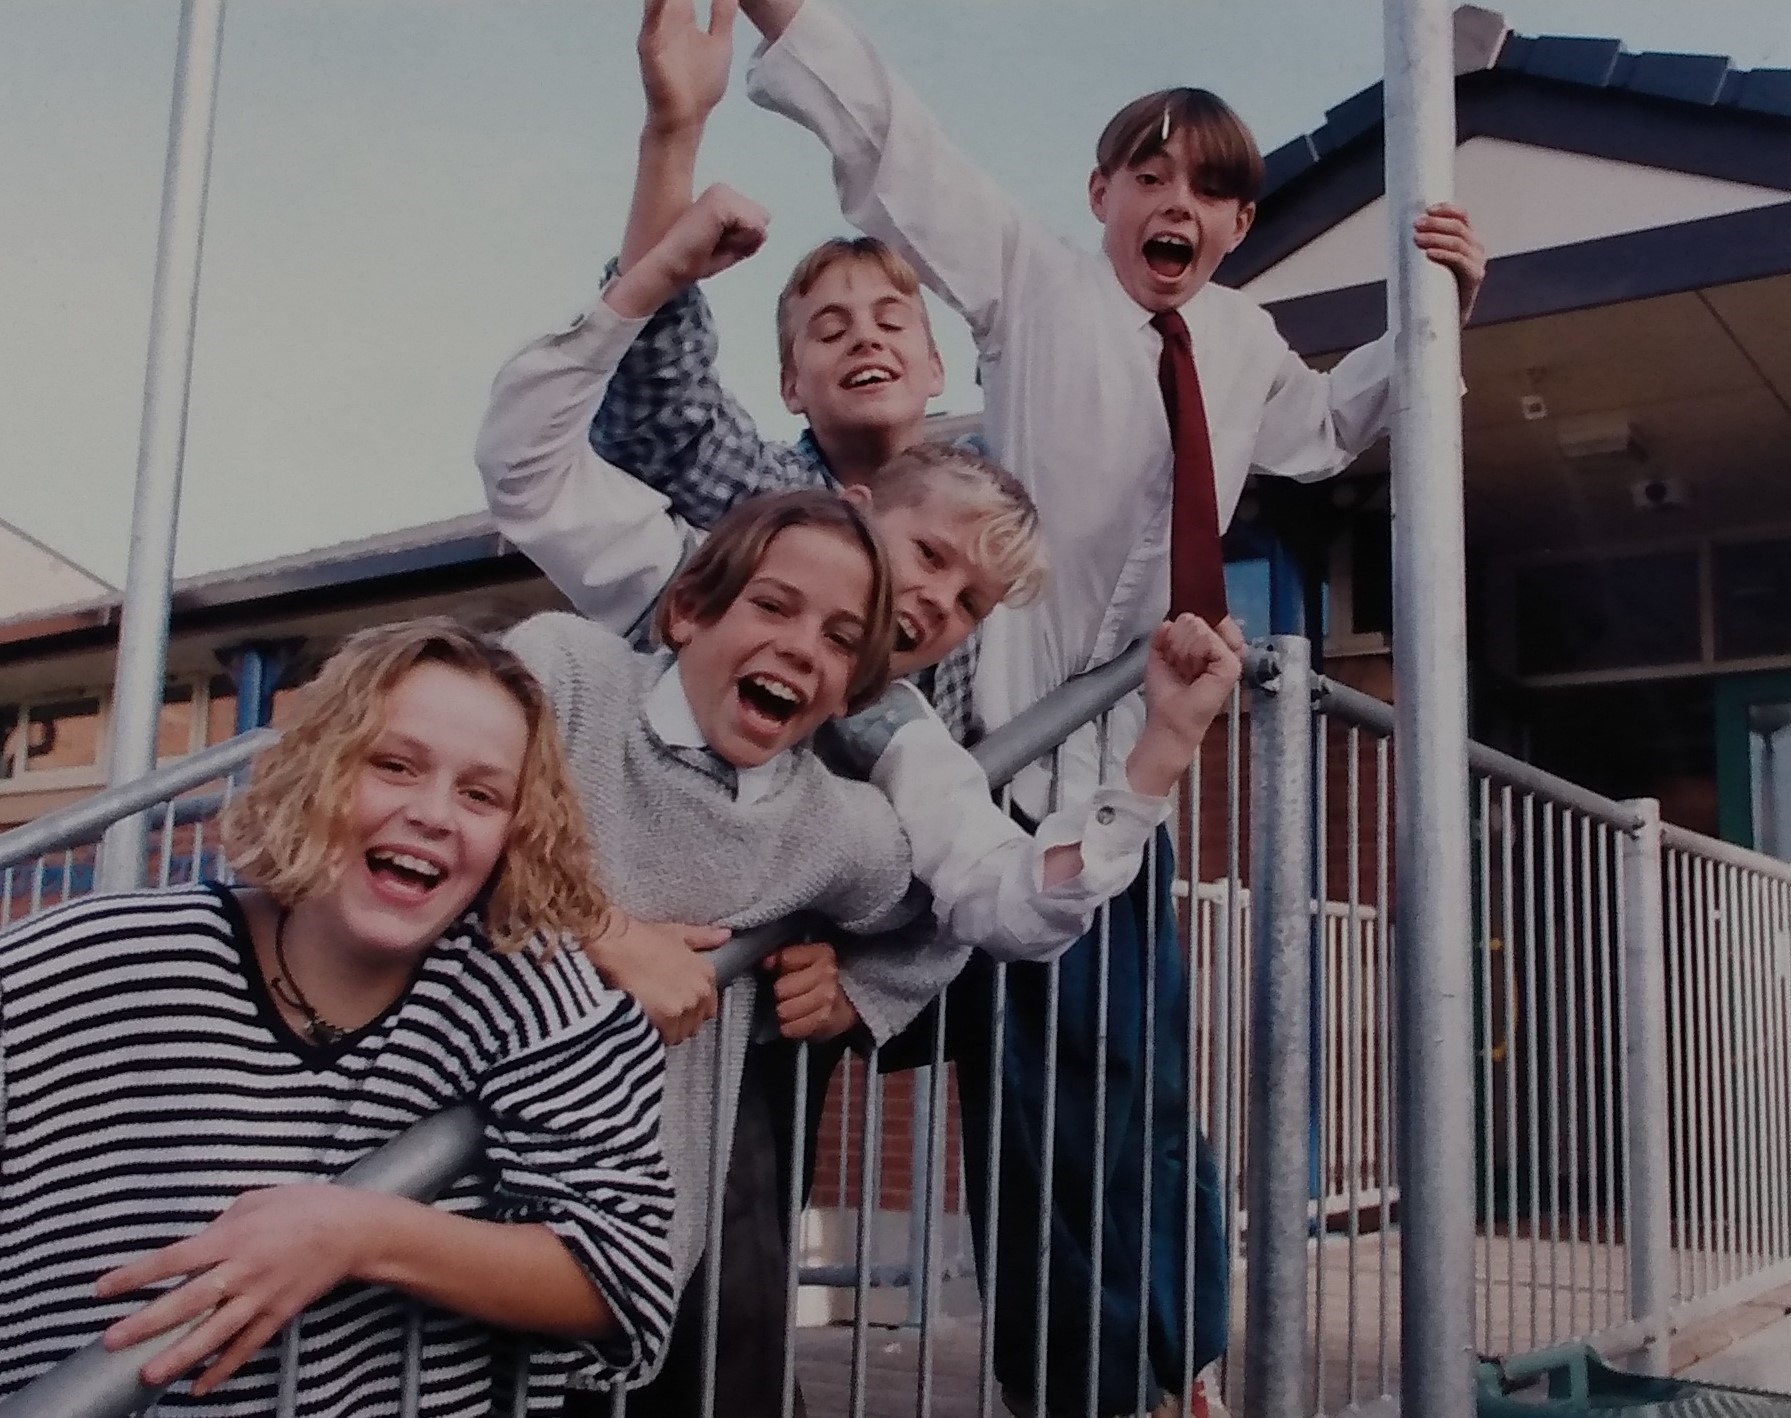 It’s October 1995 and Anna Lambert, Leon Tomkins, Luke Tomkins, Matthew Schramm and Dean Cosnett celebrate the opening of a new youth centre in Pershore